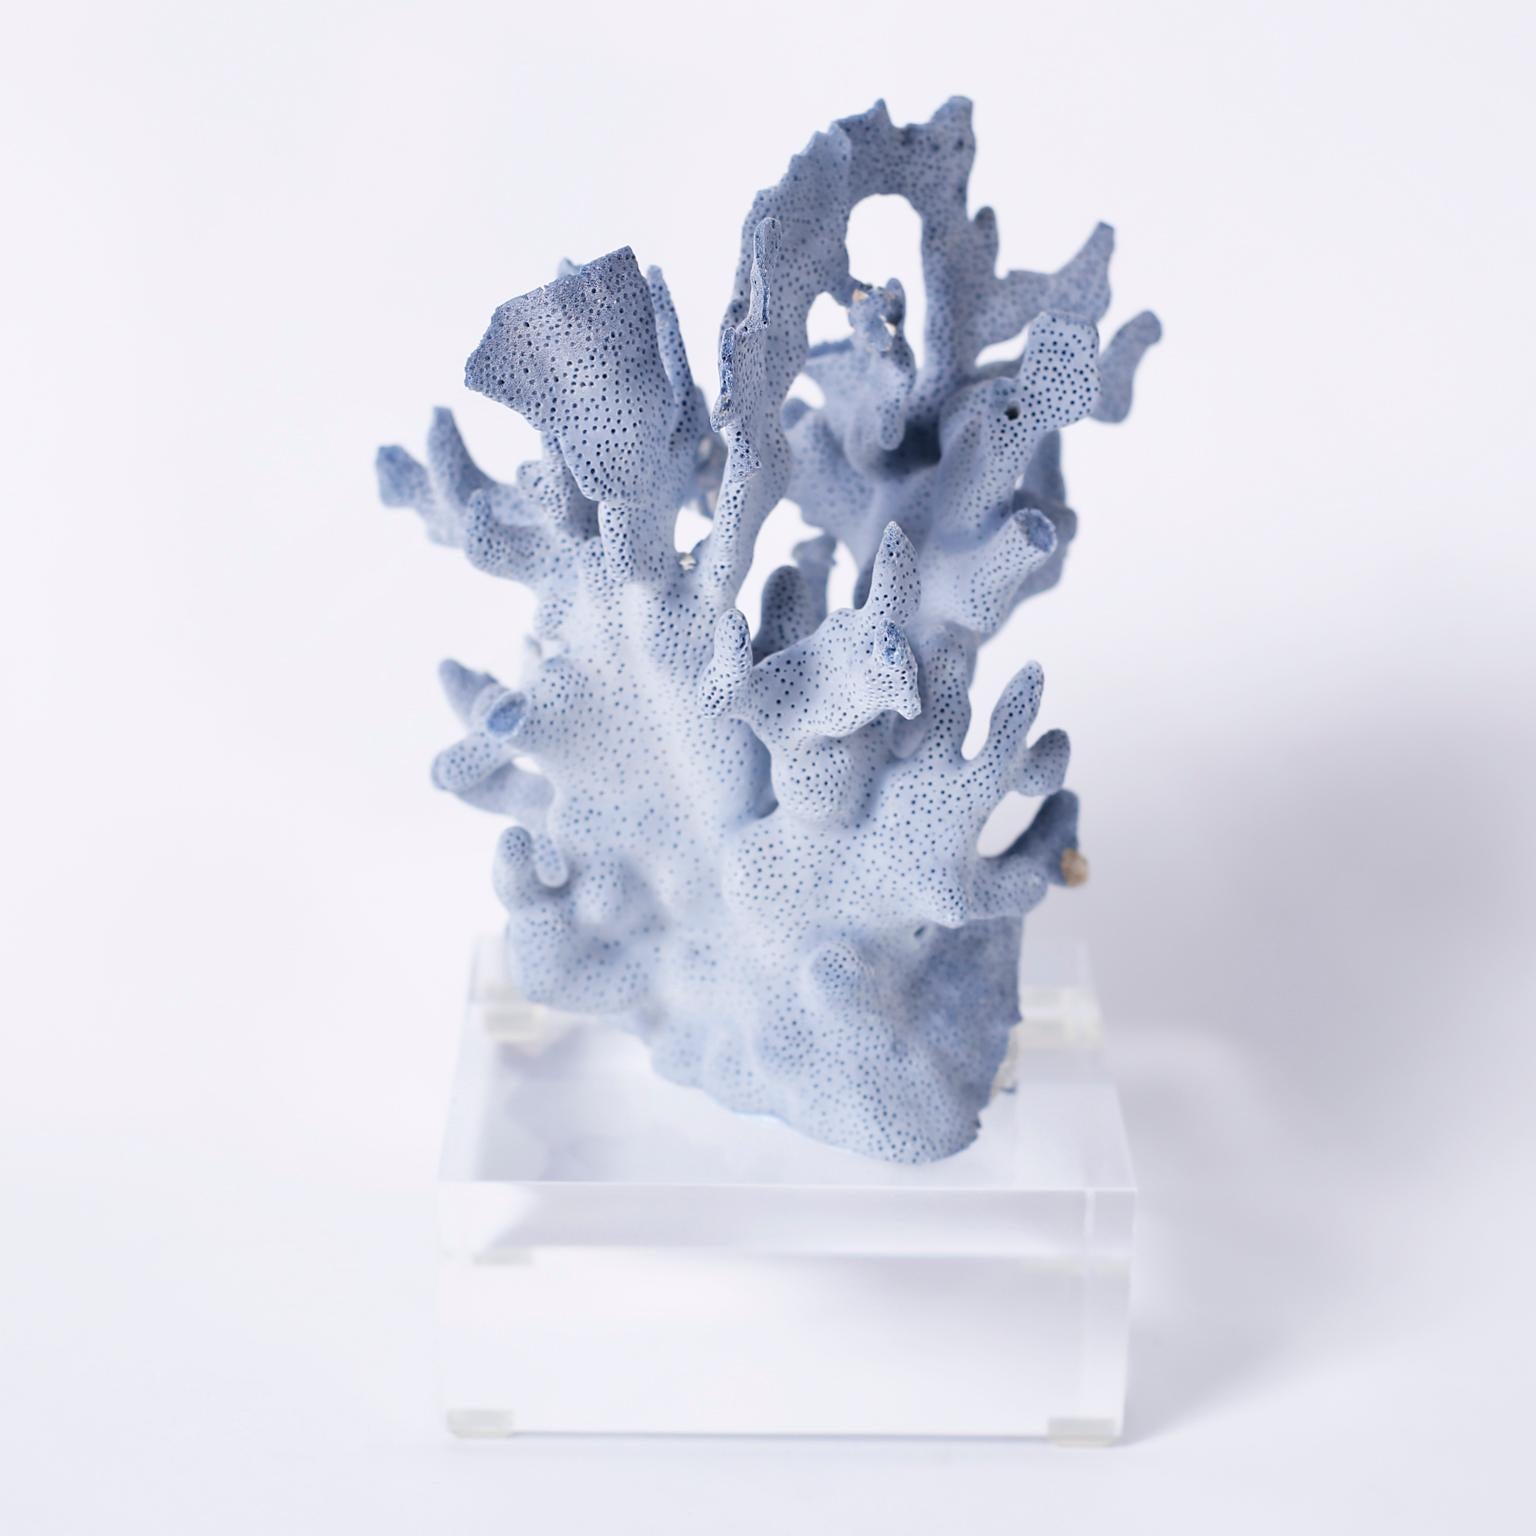 Three impressive blue coral specimens each with its own alluring blue color and unique sea inspired form and texture, presented on Lucite bases to enhance the sculptural elements. Priced individually. 

Measures: Left D 68, H 9.5, W 5.5, D 6

Middle